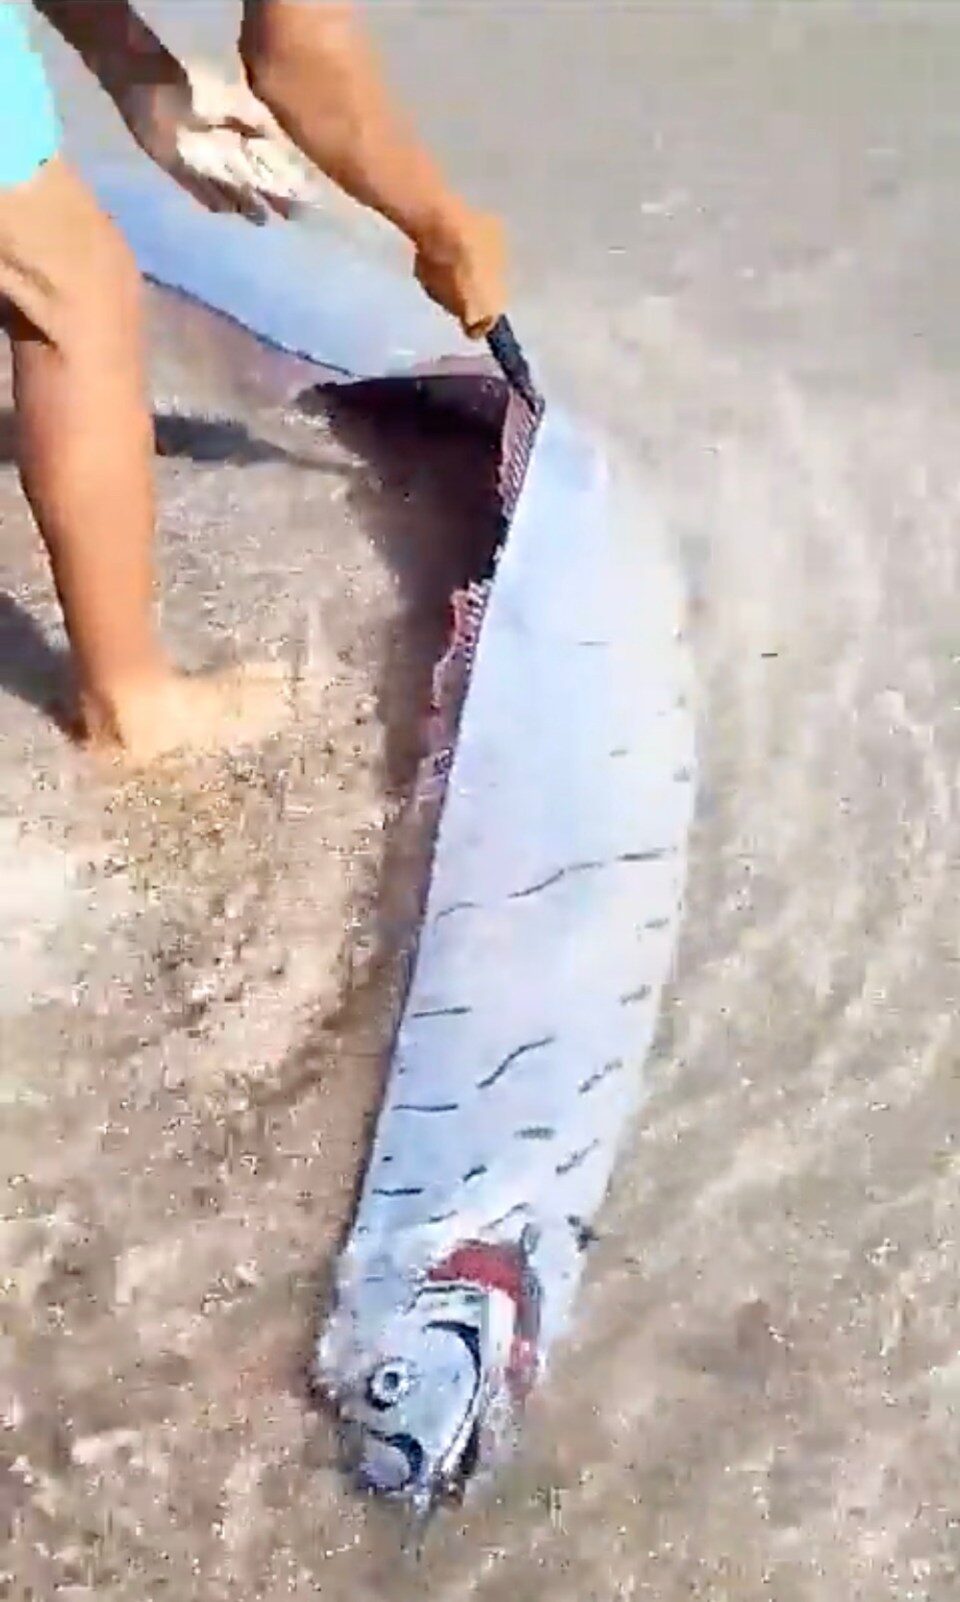 Rare oarfish dubbed 'harbinger of earthquakes' found washed up on beach in the Dominican Republic